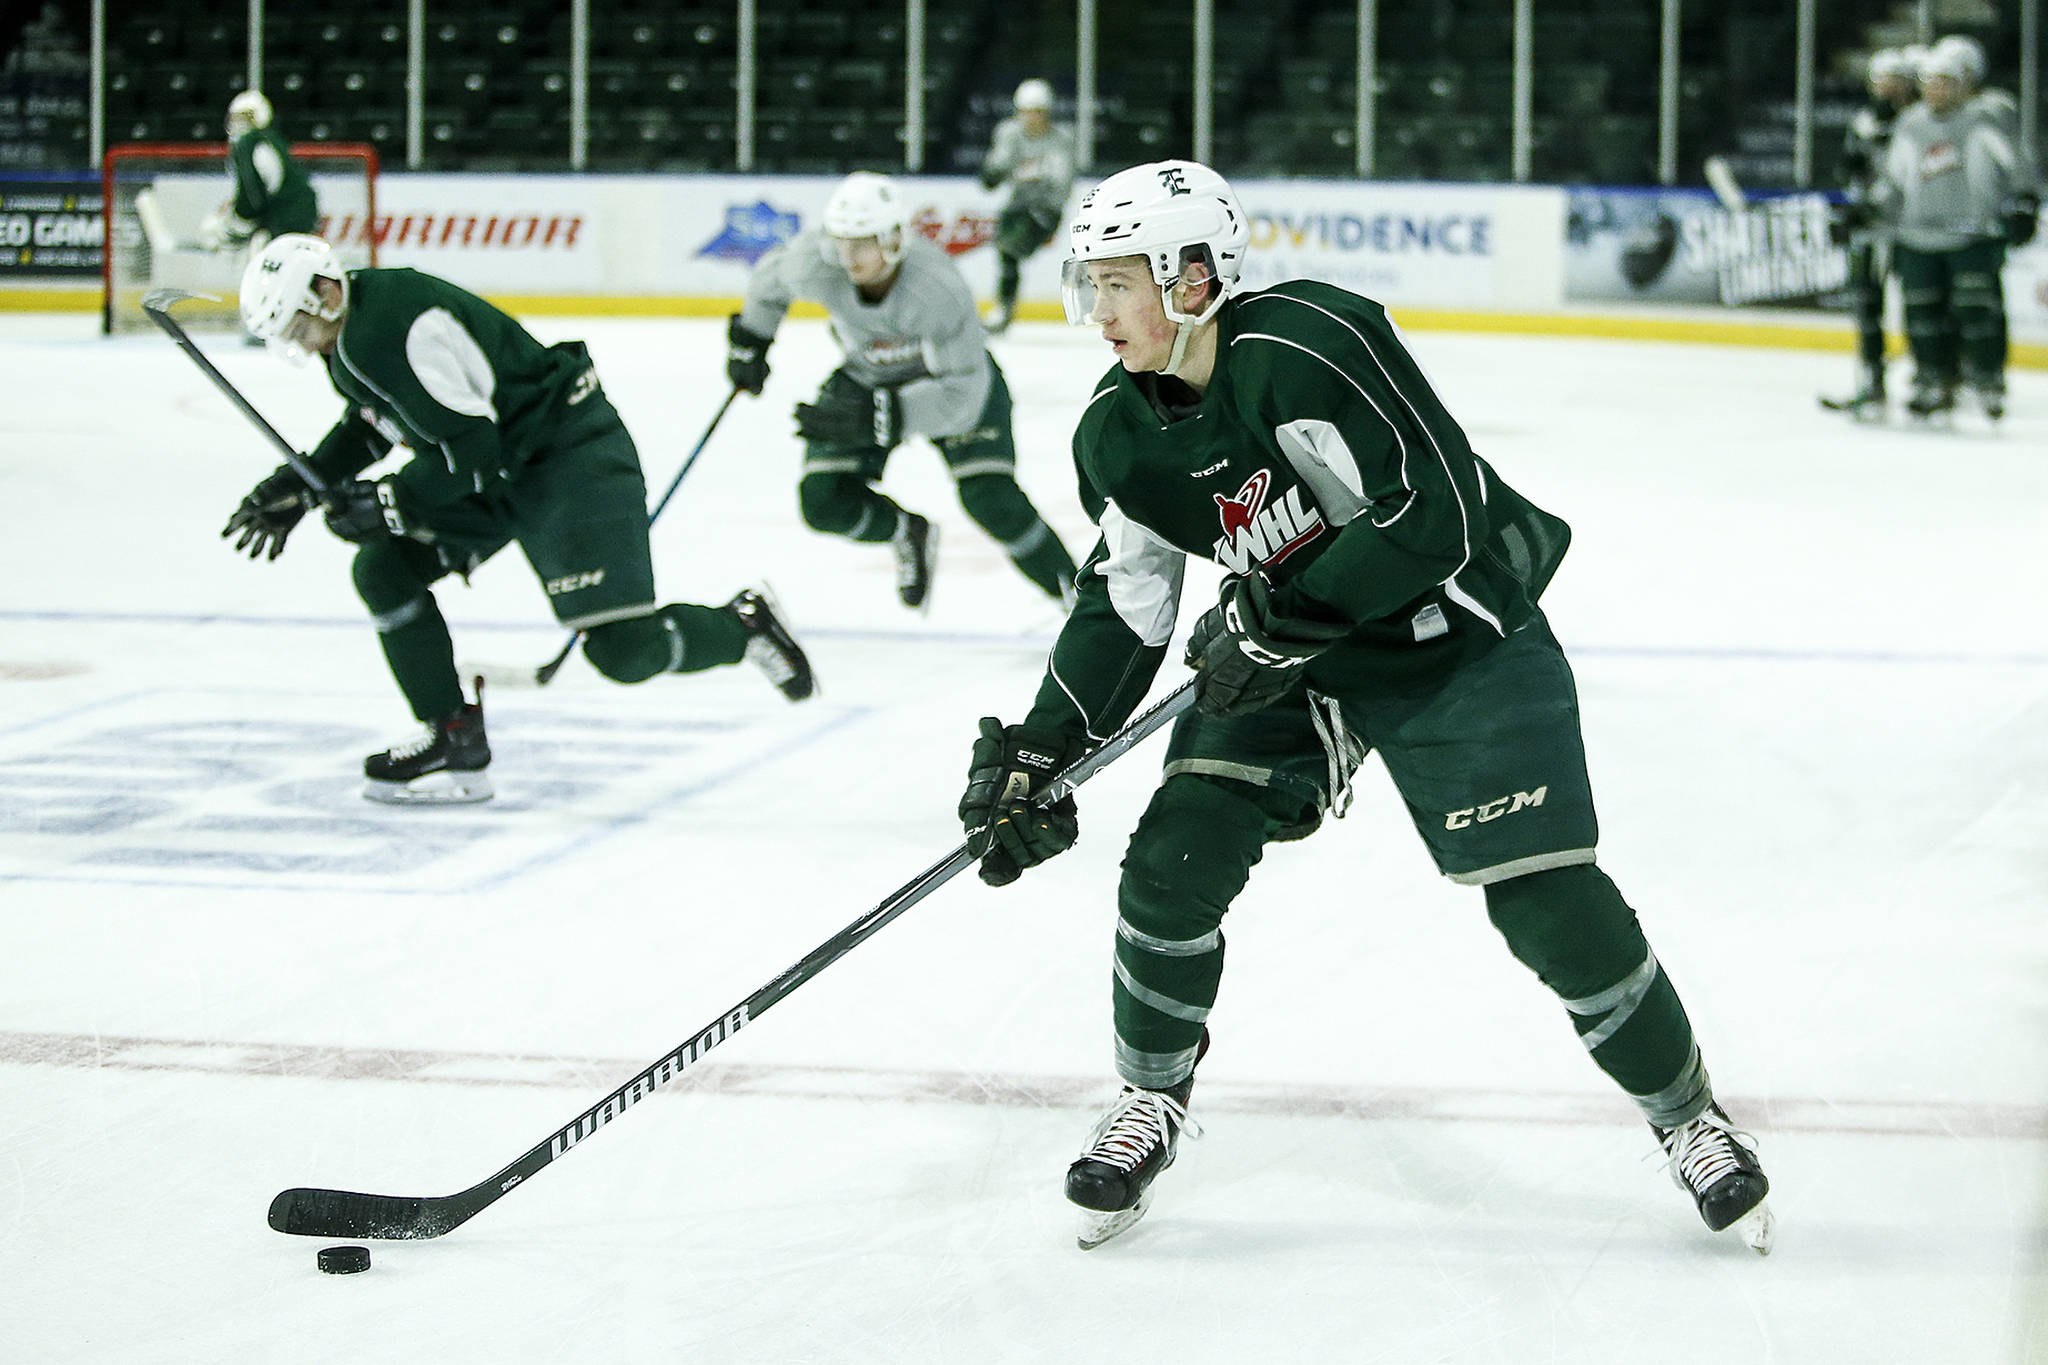 Silvertips center Reece Vitelli skates with the puck during a team practice on April 4, 2018, at Angel of the Winds Arena in Everett. (Ian Terry / The Herald)